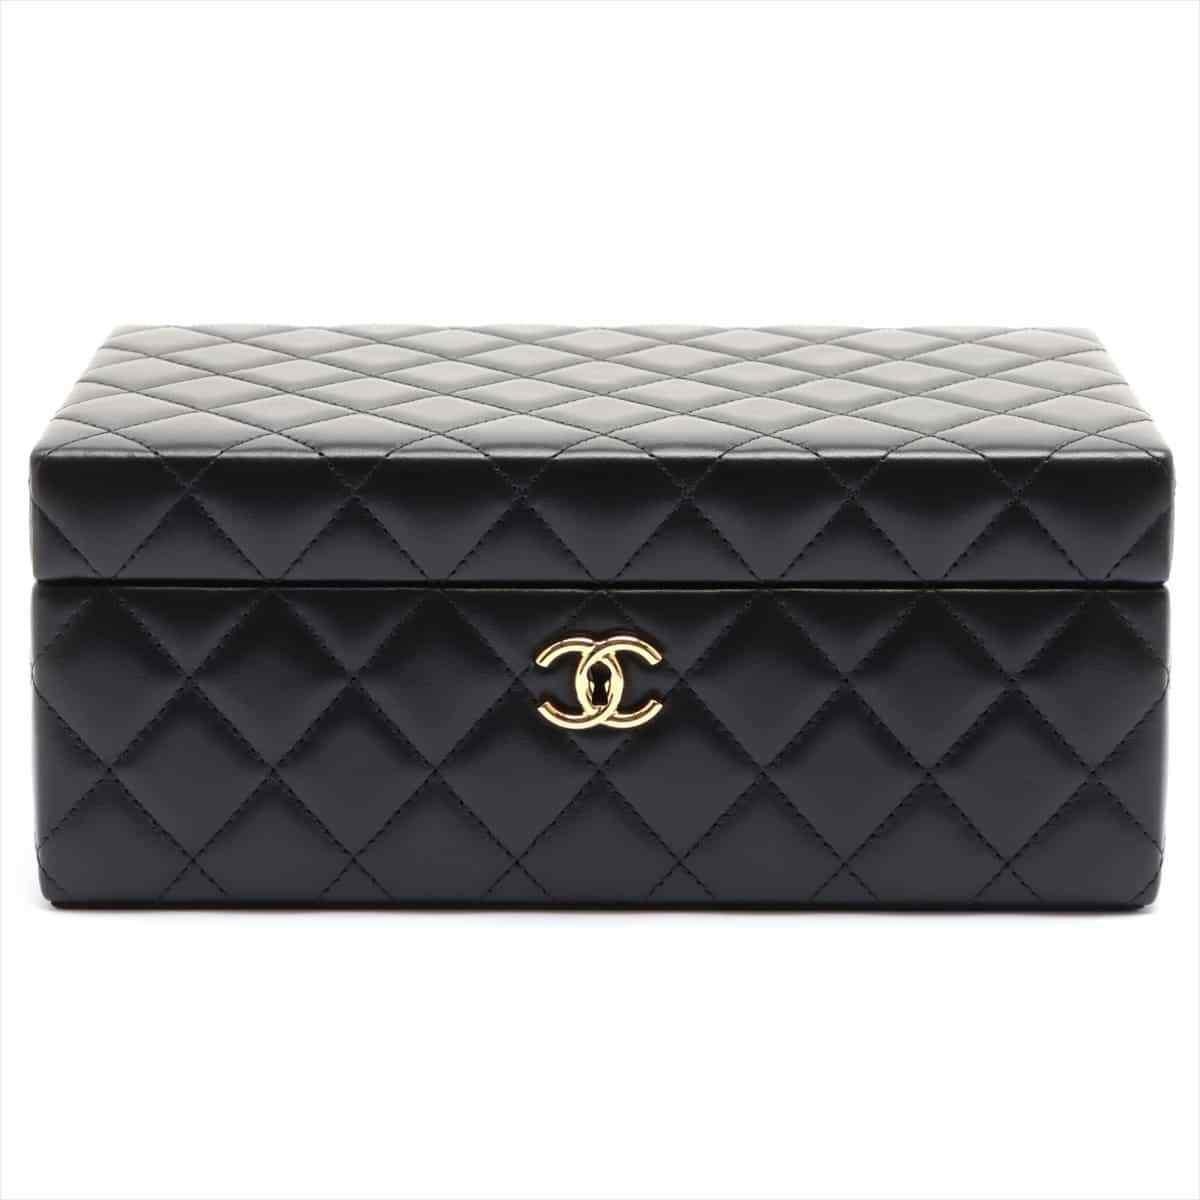 Chanel Rare Limited Edition Black Quilted Lambskin Collectors Decor Jewelry Box 

Brand New with Tags and Box

Black Gold Metal 22 Series Key x2

Quilted Lambskin

Gold Hardware

Made in Italy